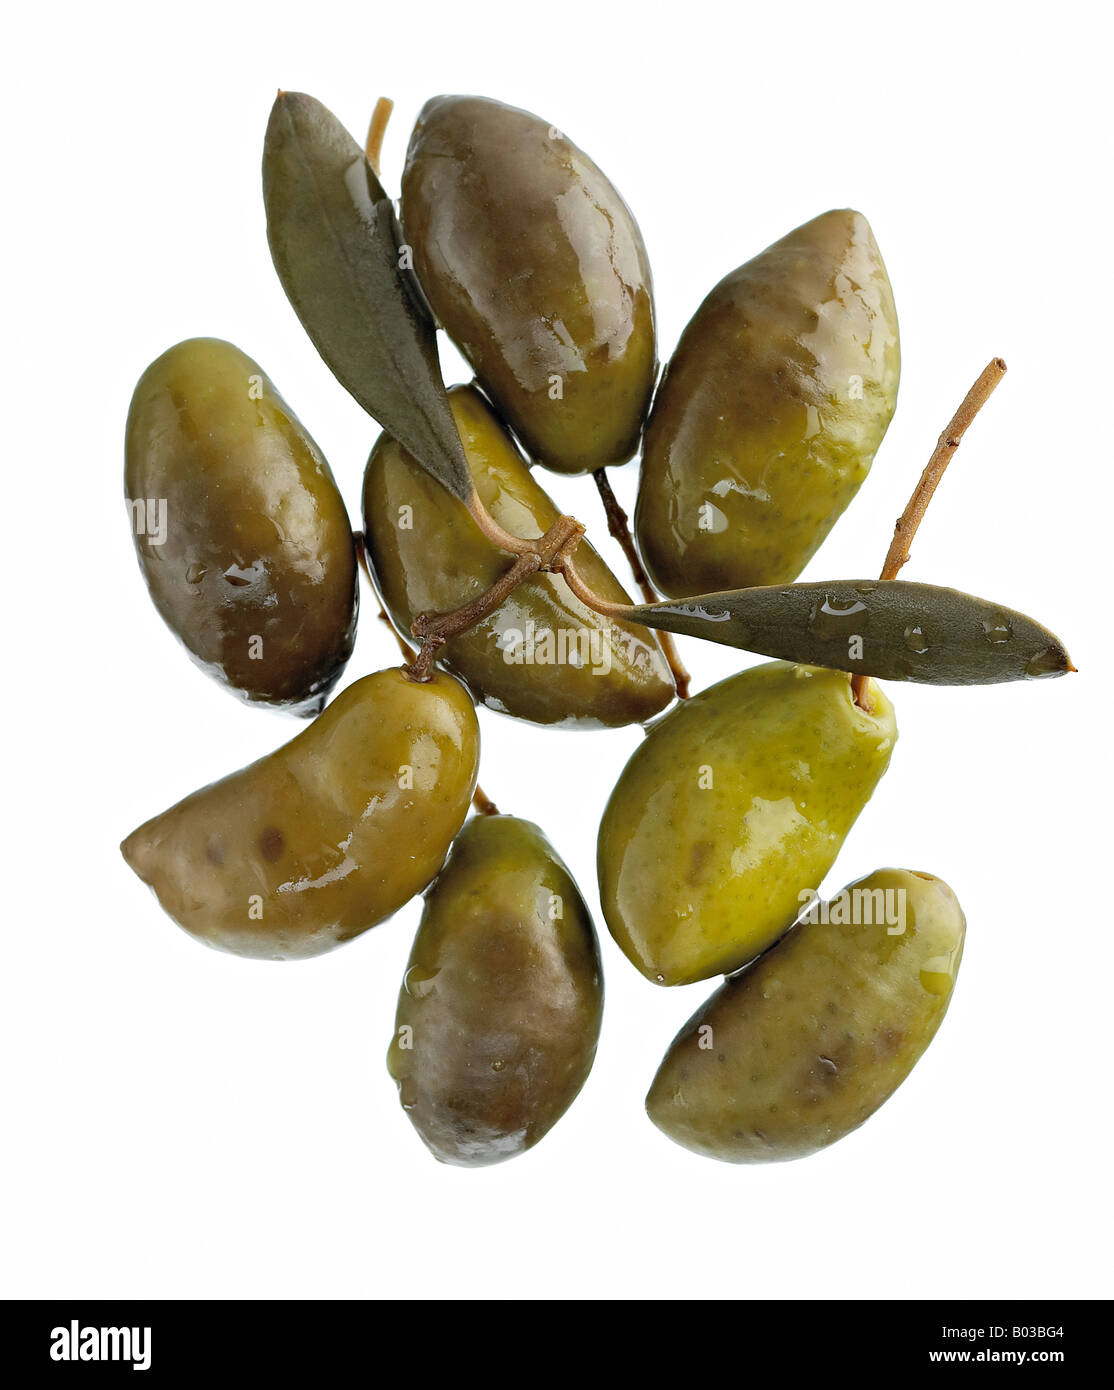 Lucques olives Stock Photo